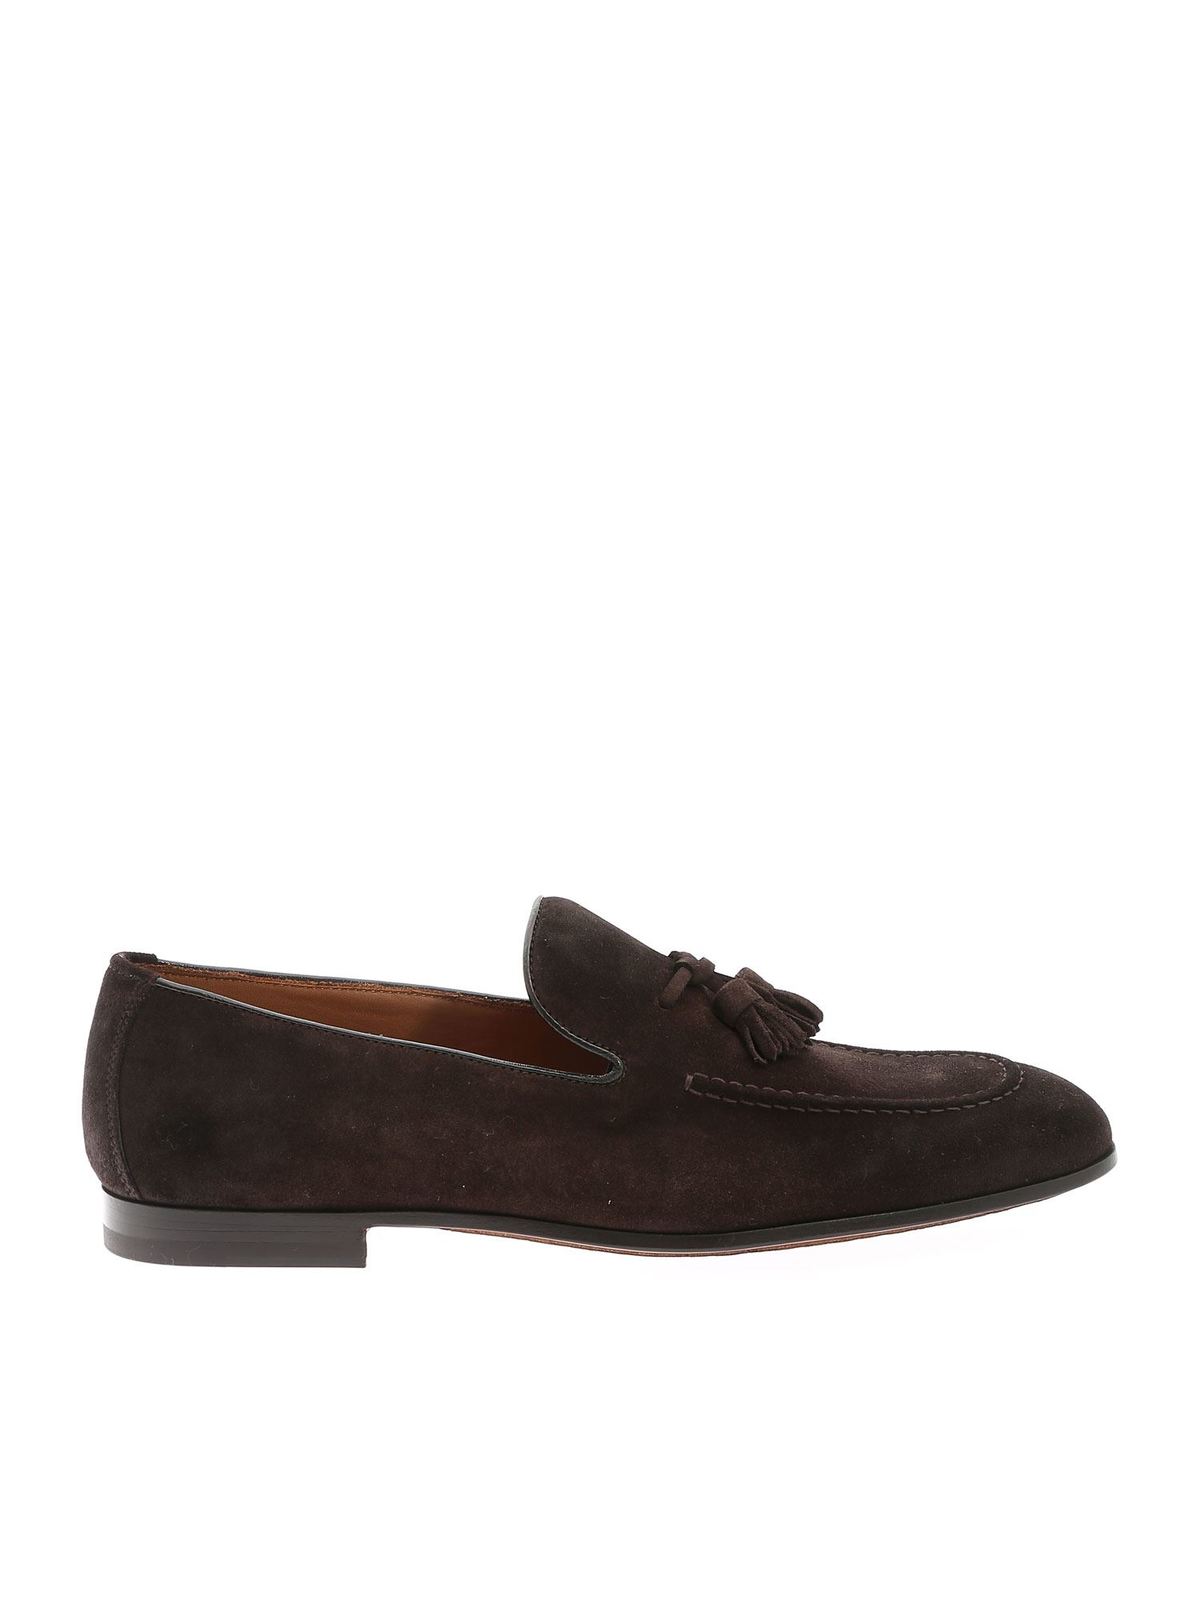 Doucal's Loafers PENNY BAR LOAFERS IN BROWN